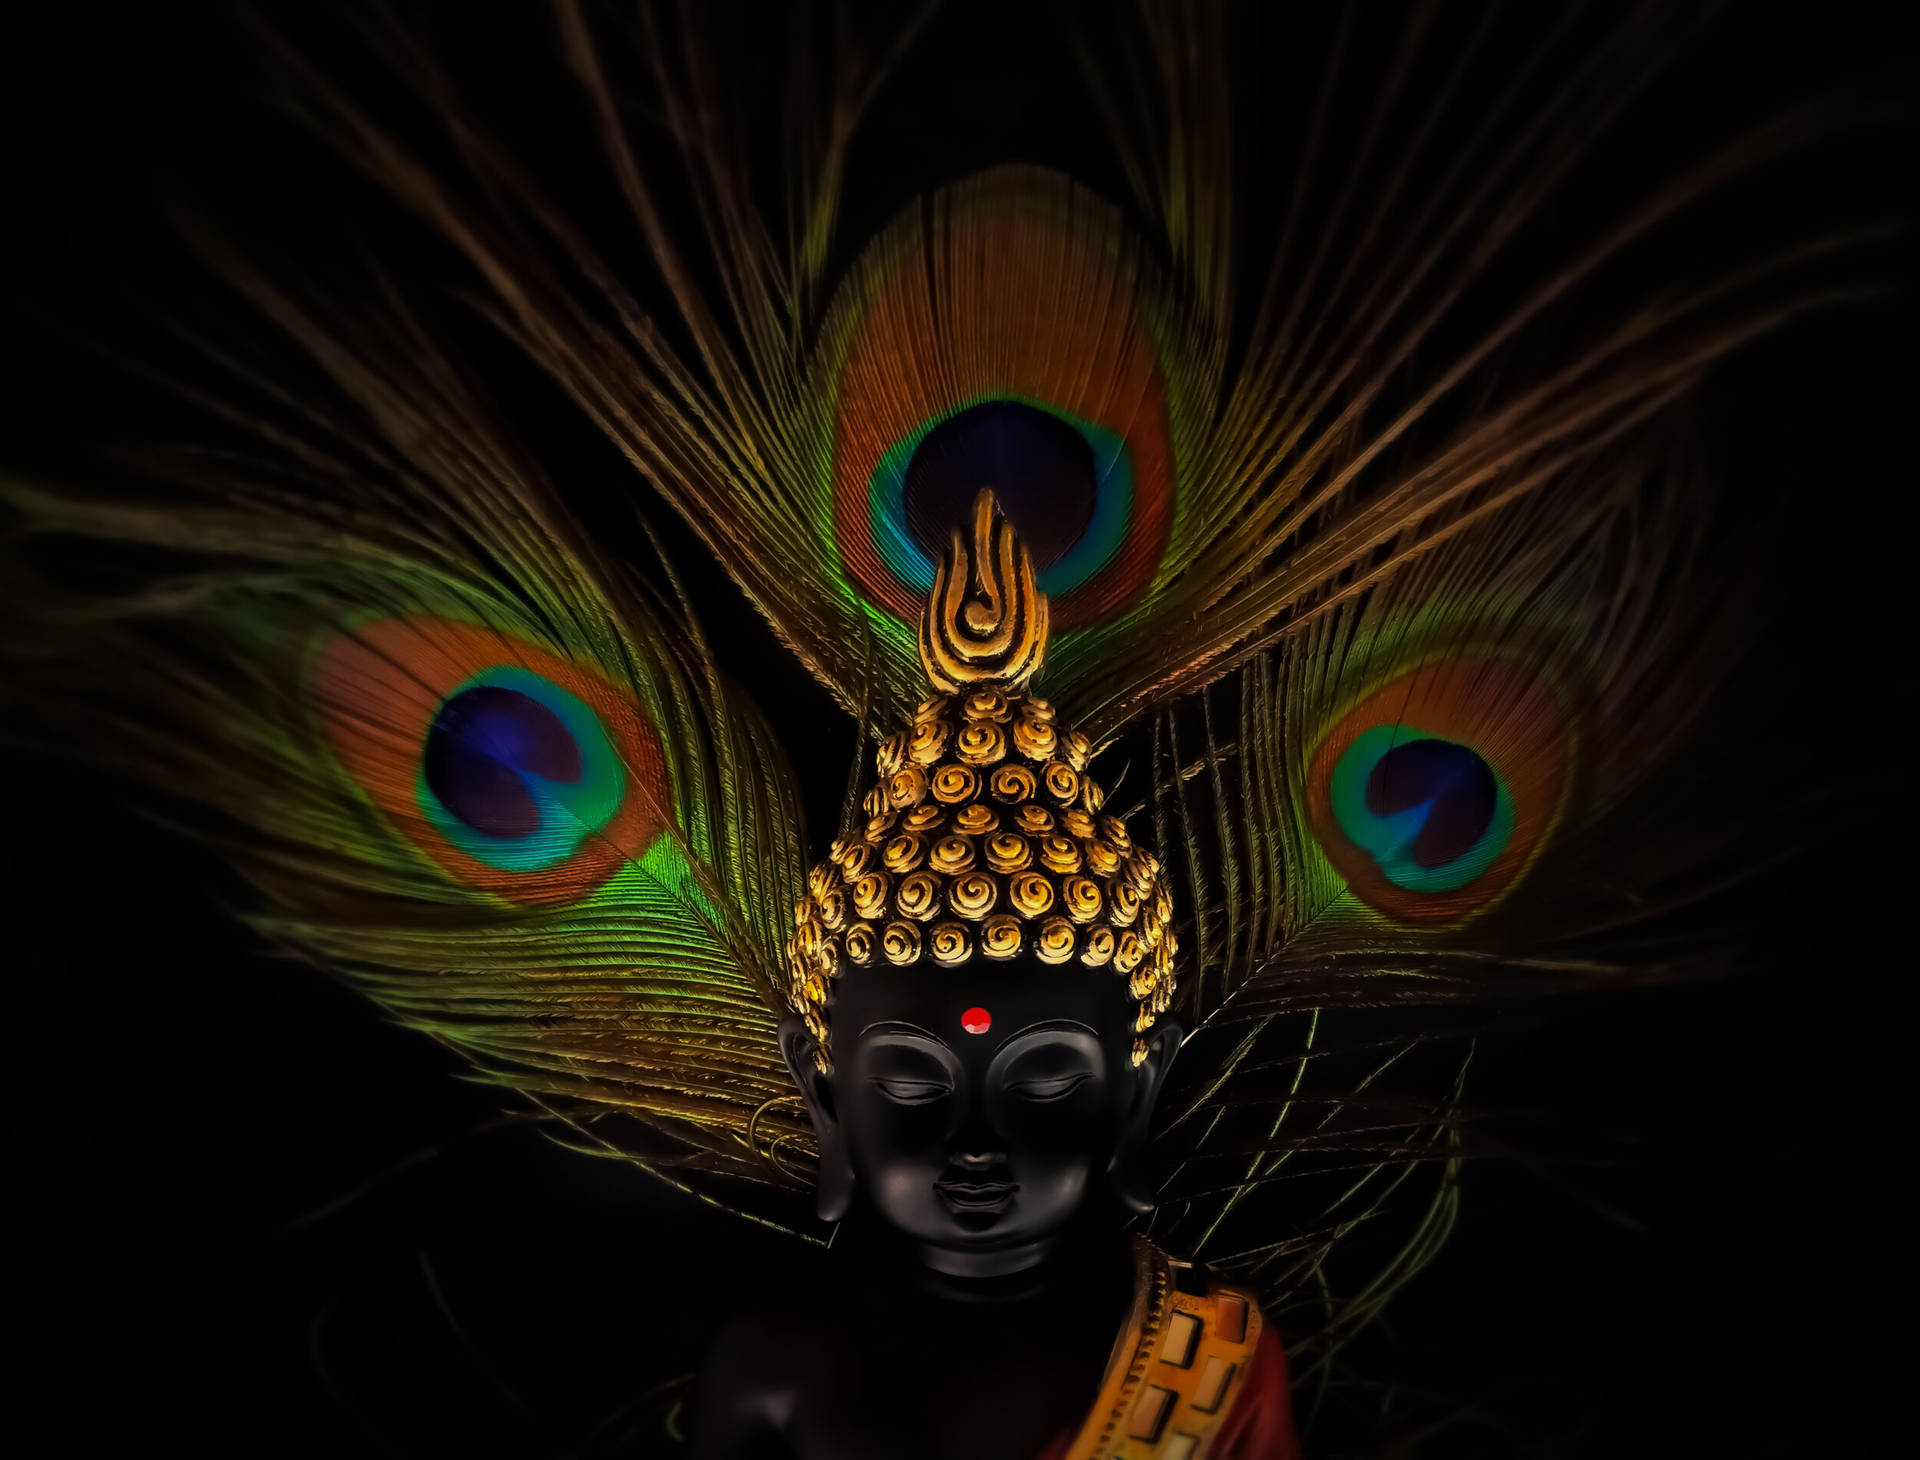 Devotion In Colors: Divine Image Of Vithu Mauli Adorned With Peacock Feathers